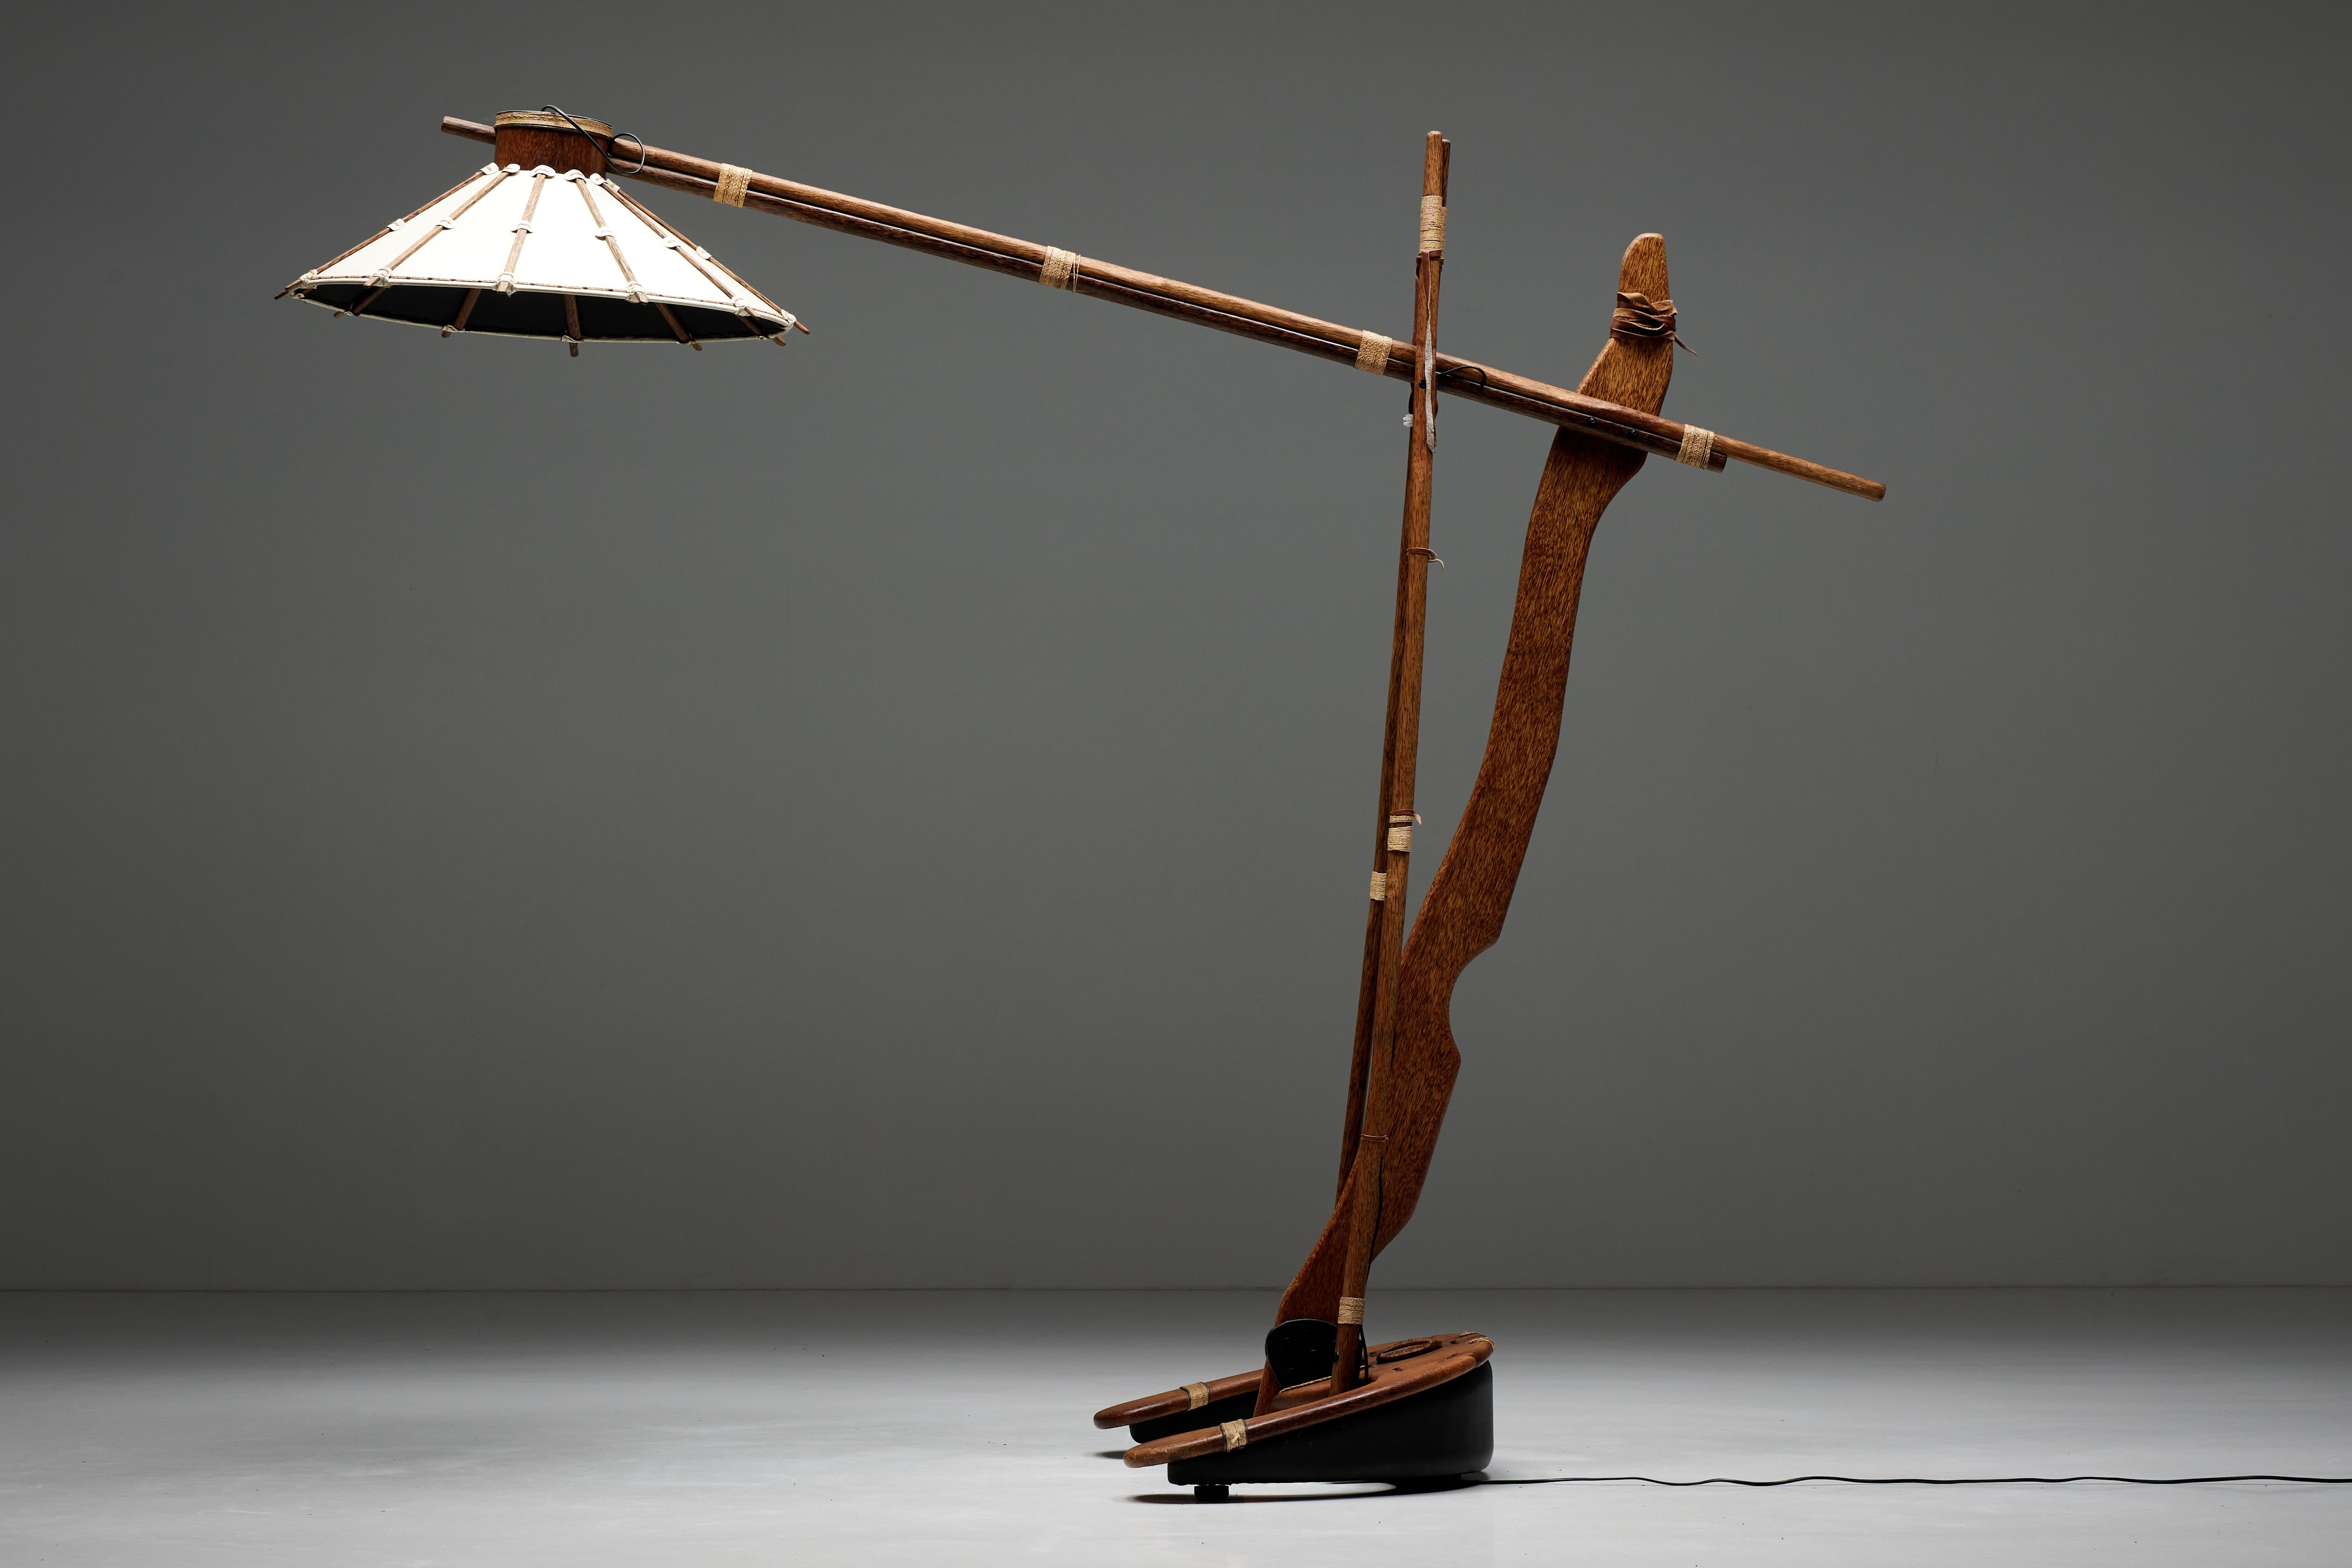 Palm Wood; Studio Craft; Arc; Floor Lamp; 1980s; American Craftsman; Craftsmanship; Ethnic Inspired; Lightning; Artist; Functional Art; 

Palm wood floor lamp, a testament to craftsmanship and luxurious materials. Expertly handcrafted using high-end